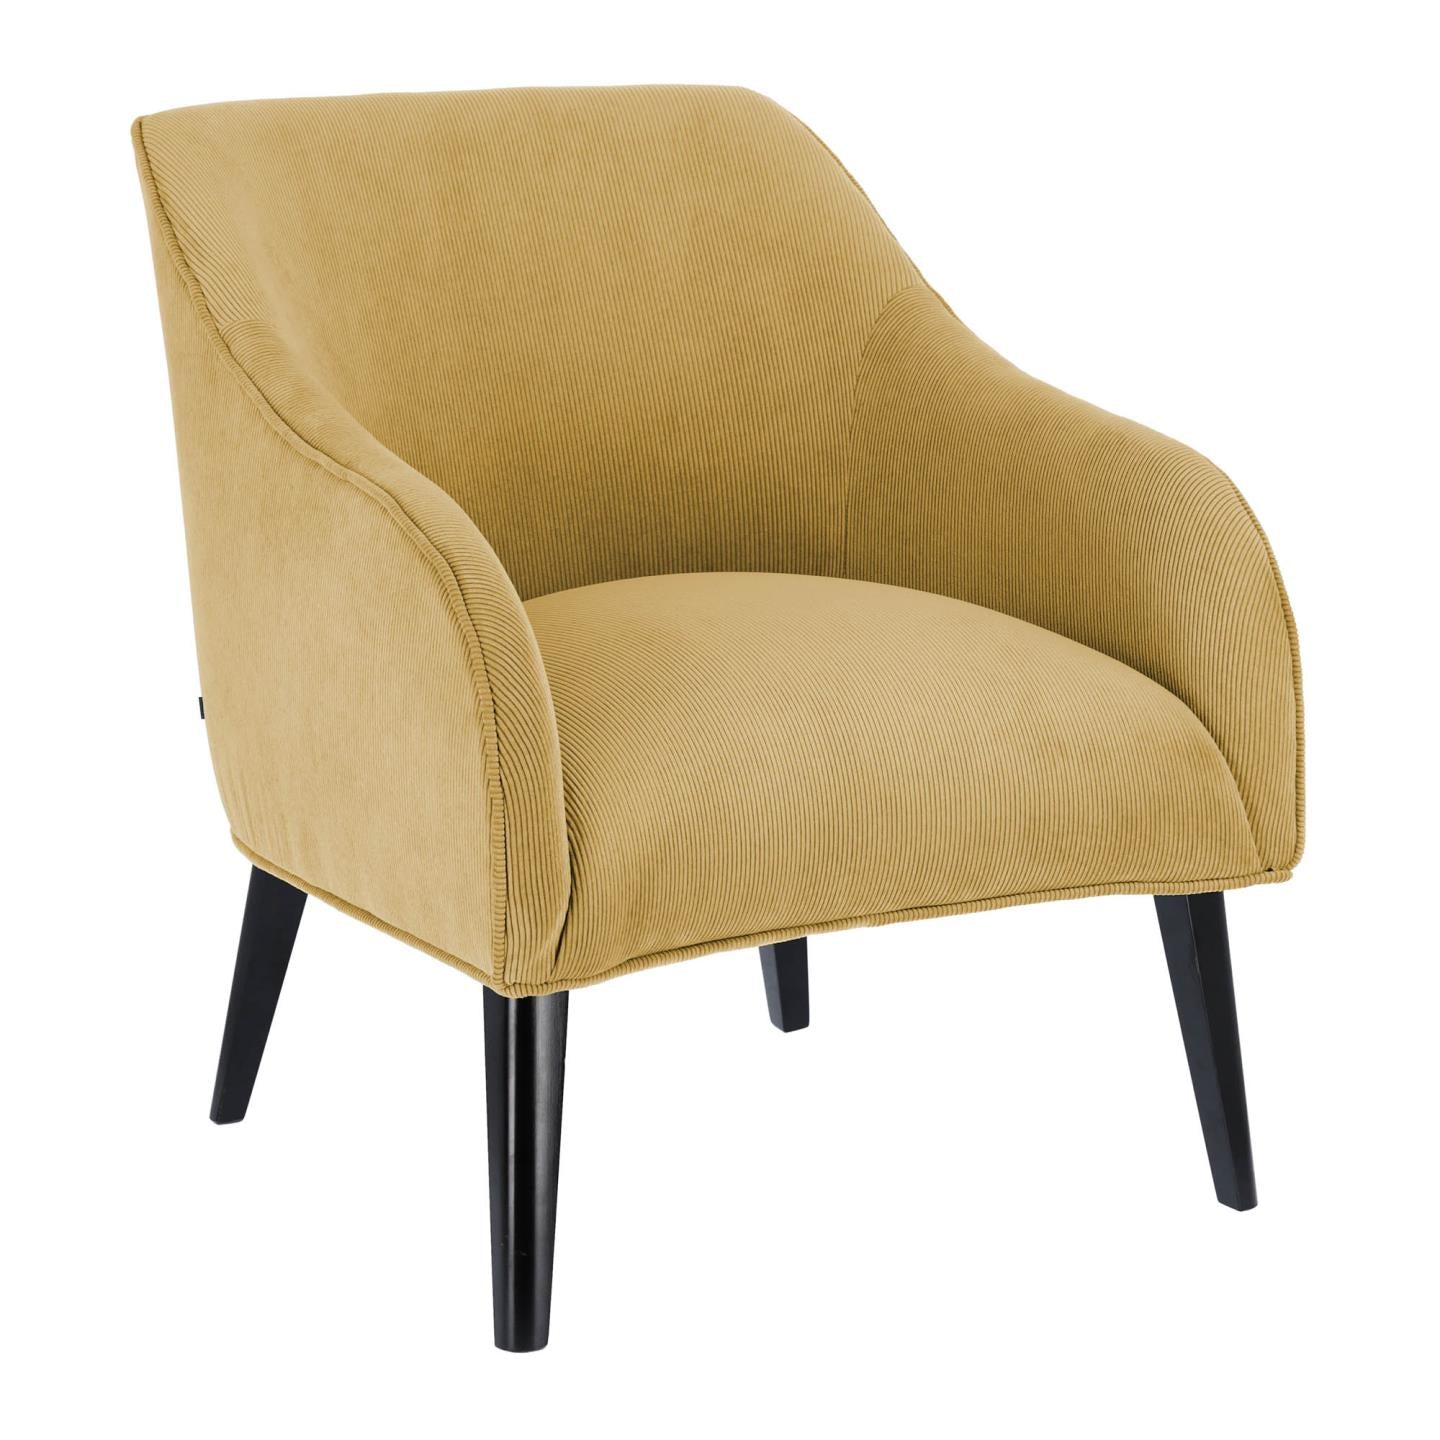 Bobly armchair in mustard corduroy with wenge finish legs